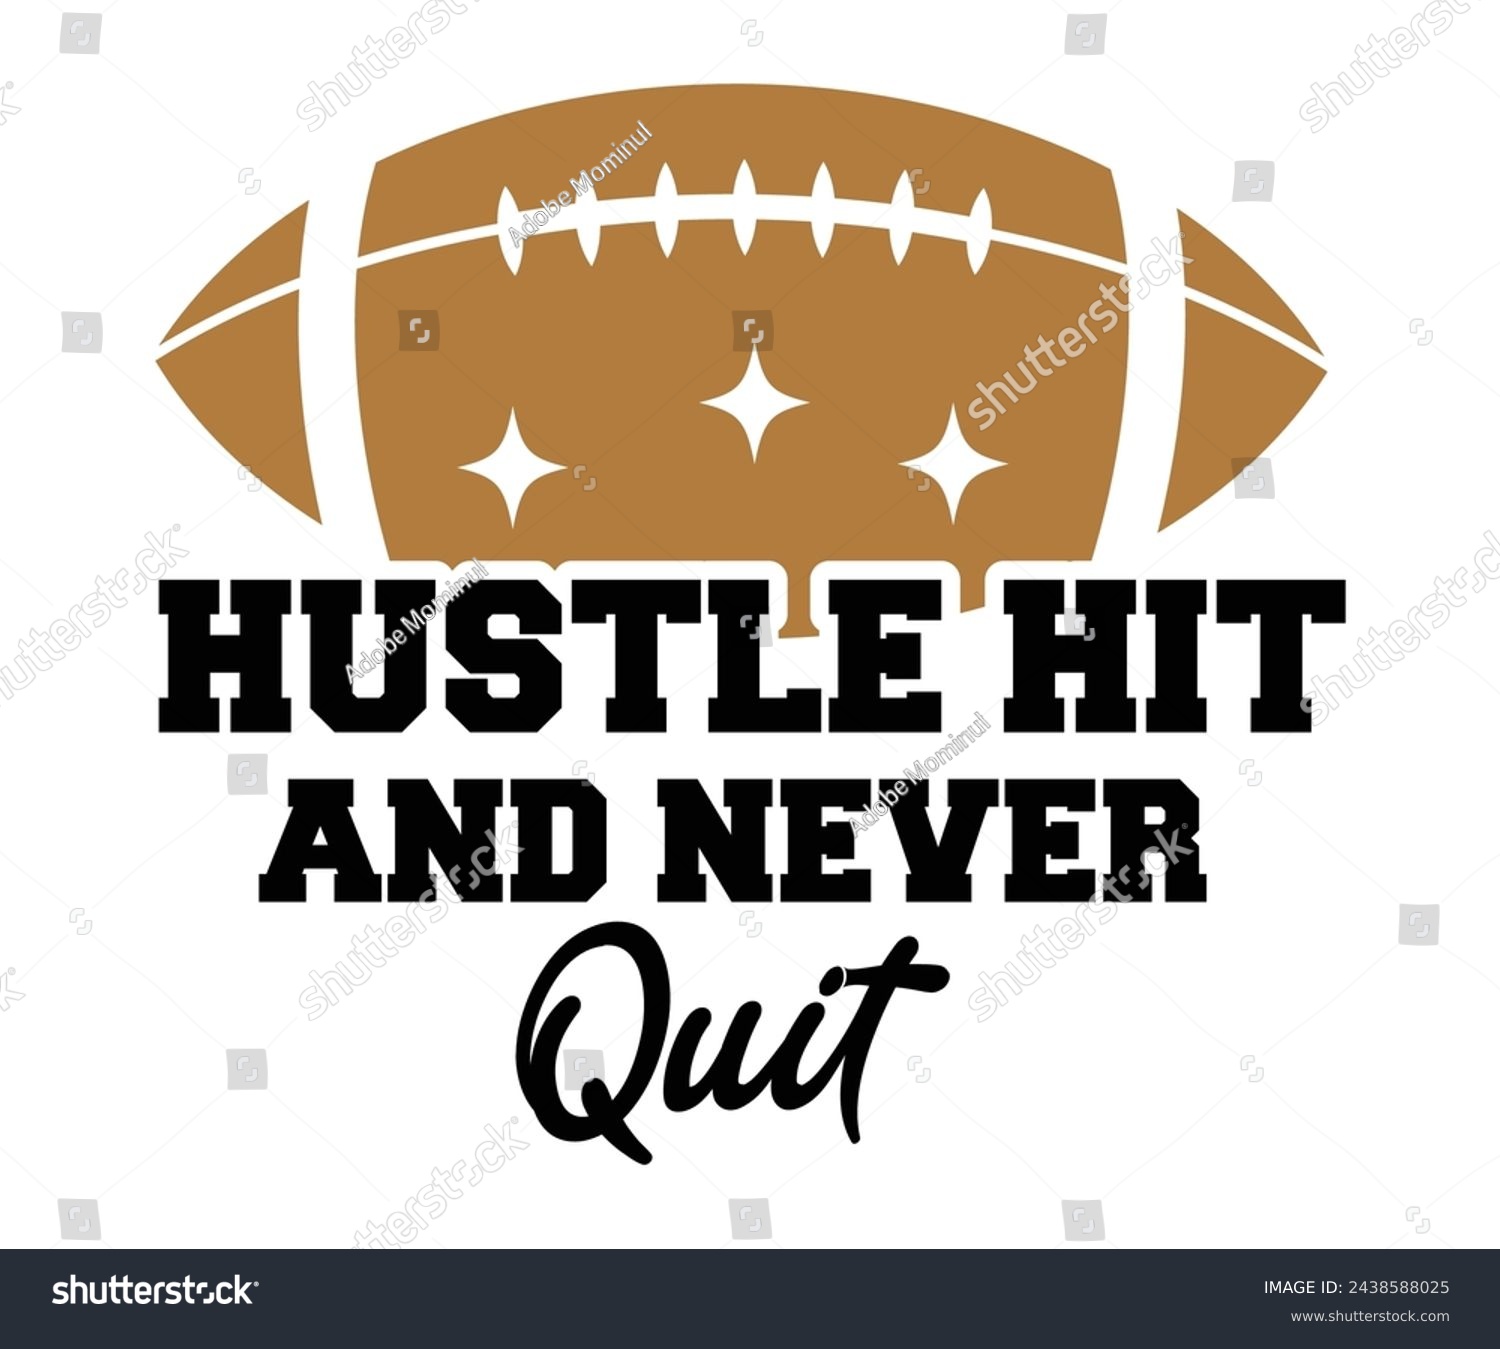 SVG of Hustle Hit Never Quit,Football Svg,Football Player Svg,Game Day Shirt,Football Quotes Svg,American Football Svg,Soccer Svg,Cut File,Commercial use svg